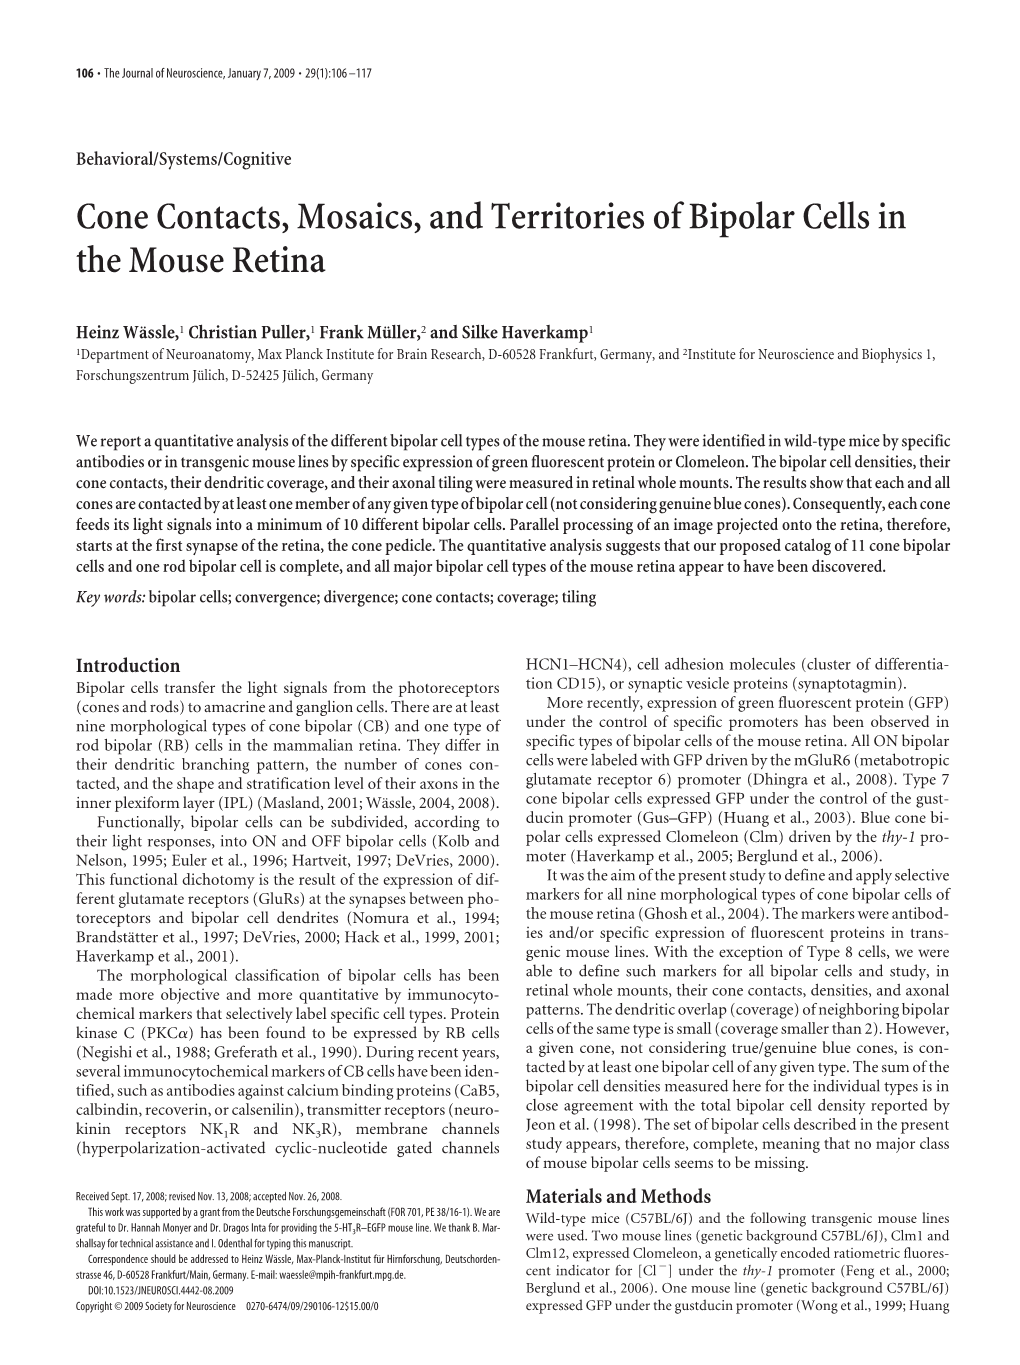 Cone Contacts, Mosaics, and Territories of Bipolar Cells in the Mouse Retina